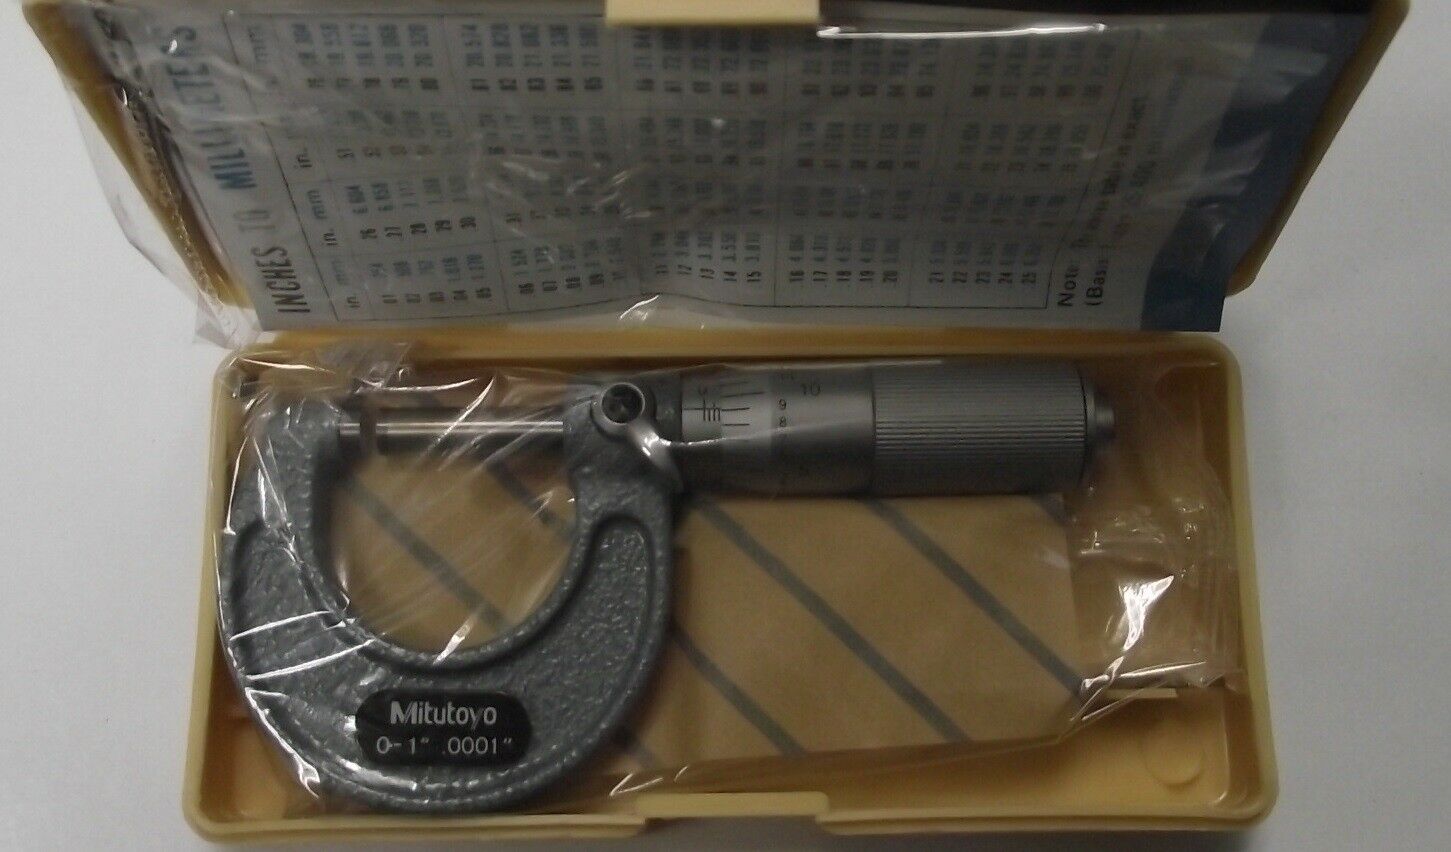 Mitutoyo 103-135 Micrometer 0-1" .0001" w/ Case And Instructions USA